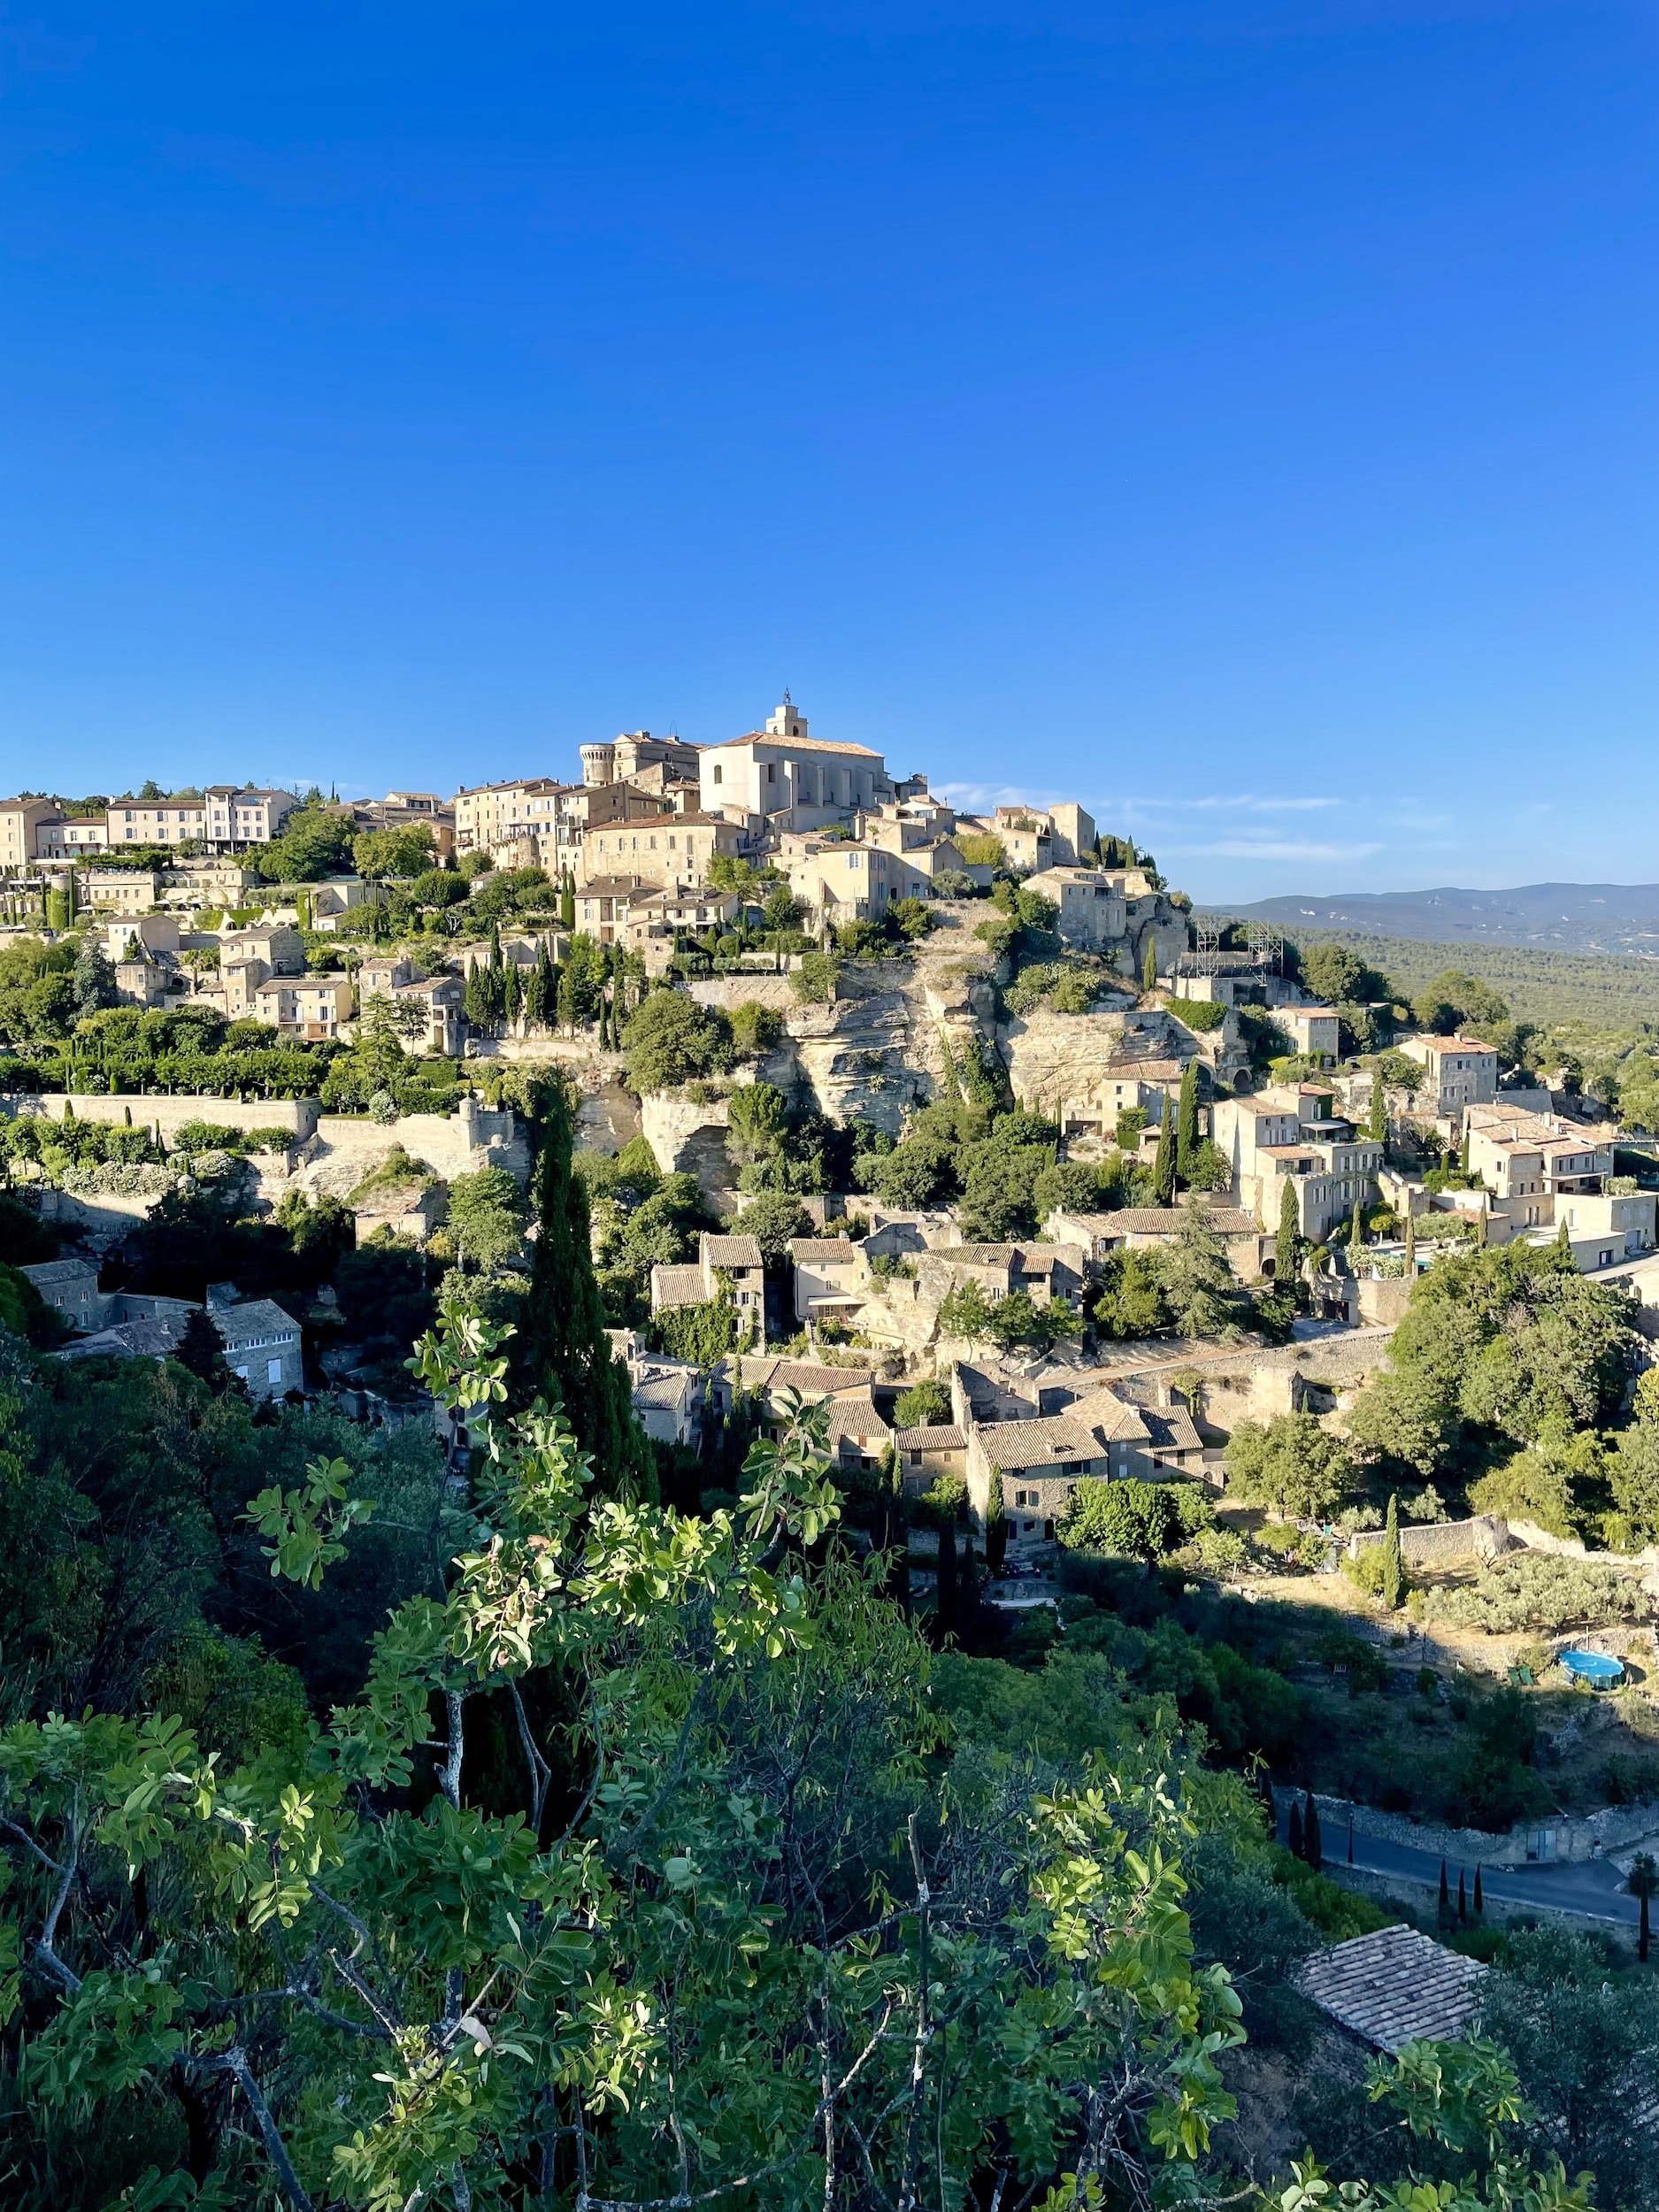 Exceptional estate and guided tour of the magnificent Luberon villages